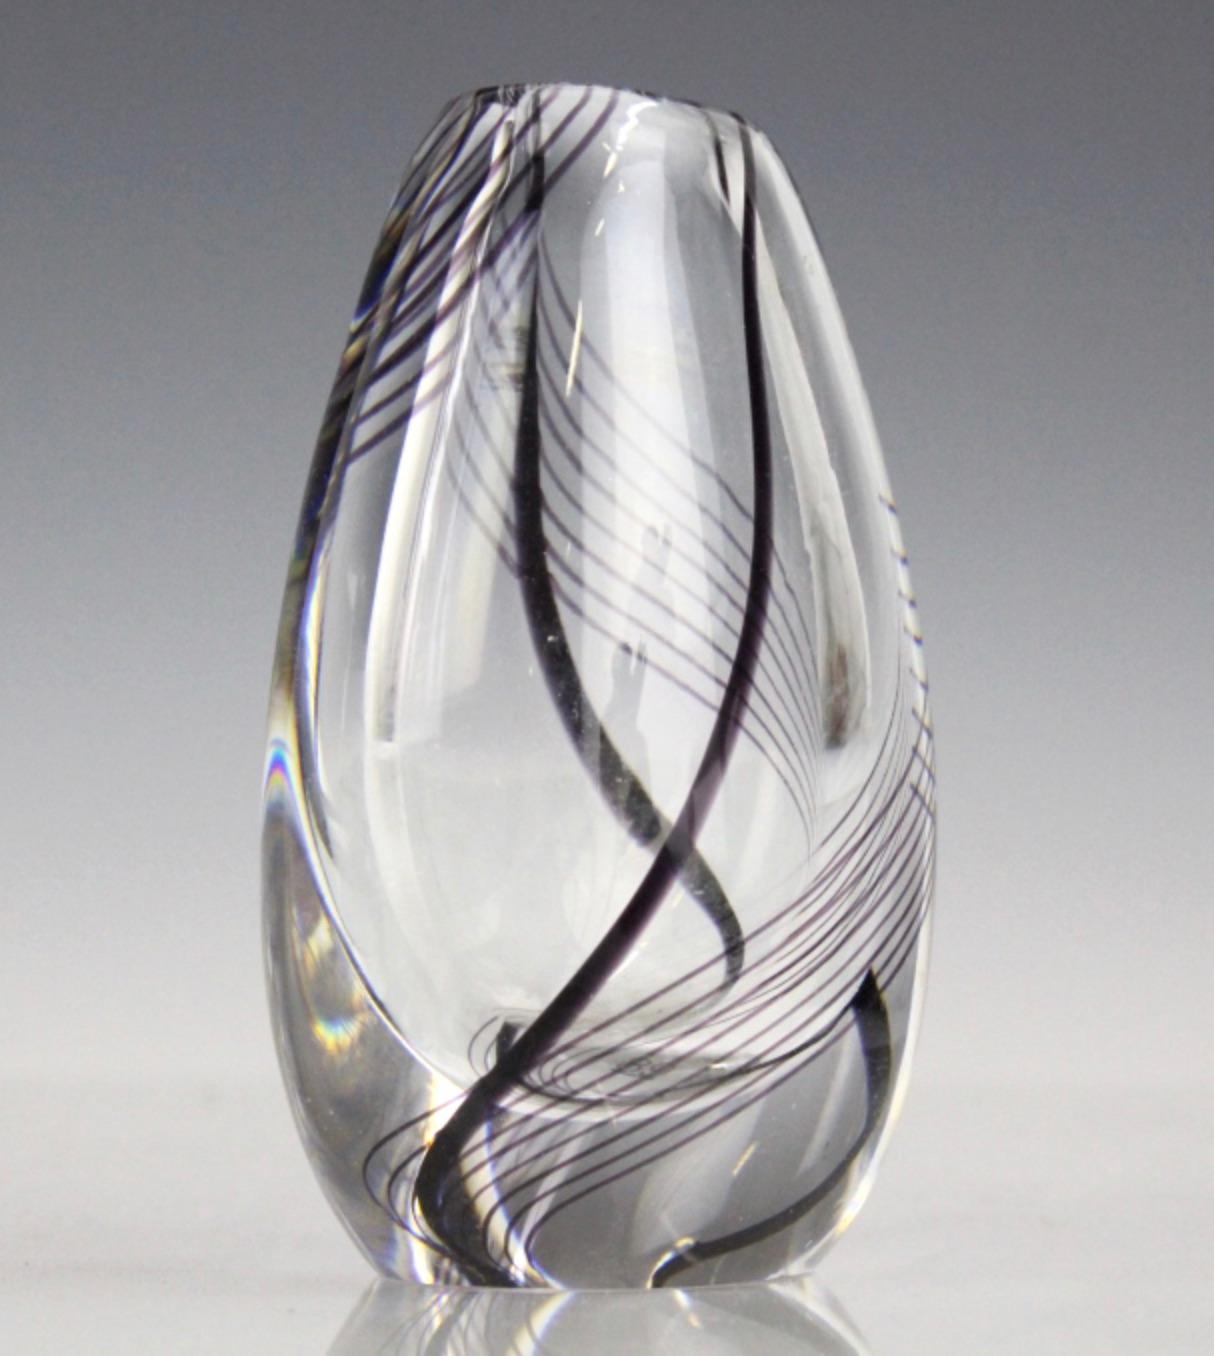 Exceptional heavy thick art glass vase fabricated by Kosta Boda, Sweden, circa 1960. This vase was designed and signed by Vicke Lindstrand. The vase is clear cased glass with a poetic design of black and purple swirling lines.
Signed on base Kosta